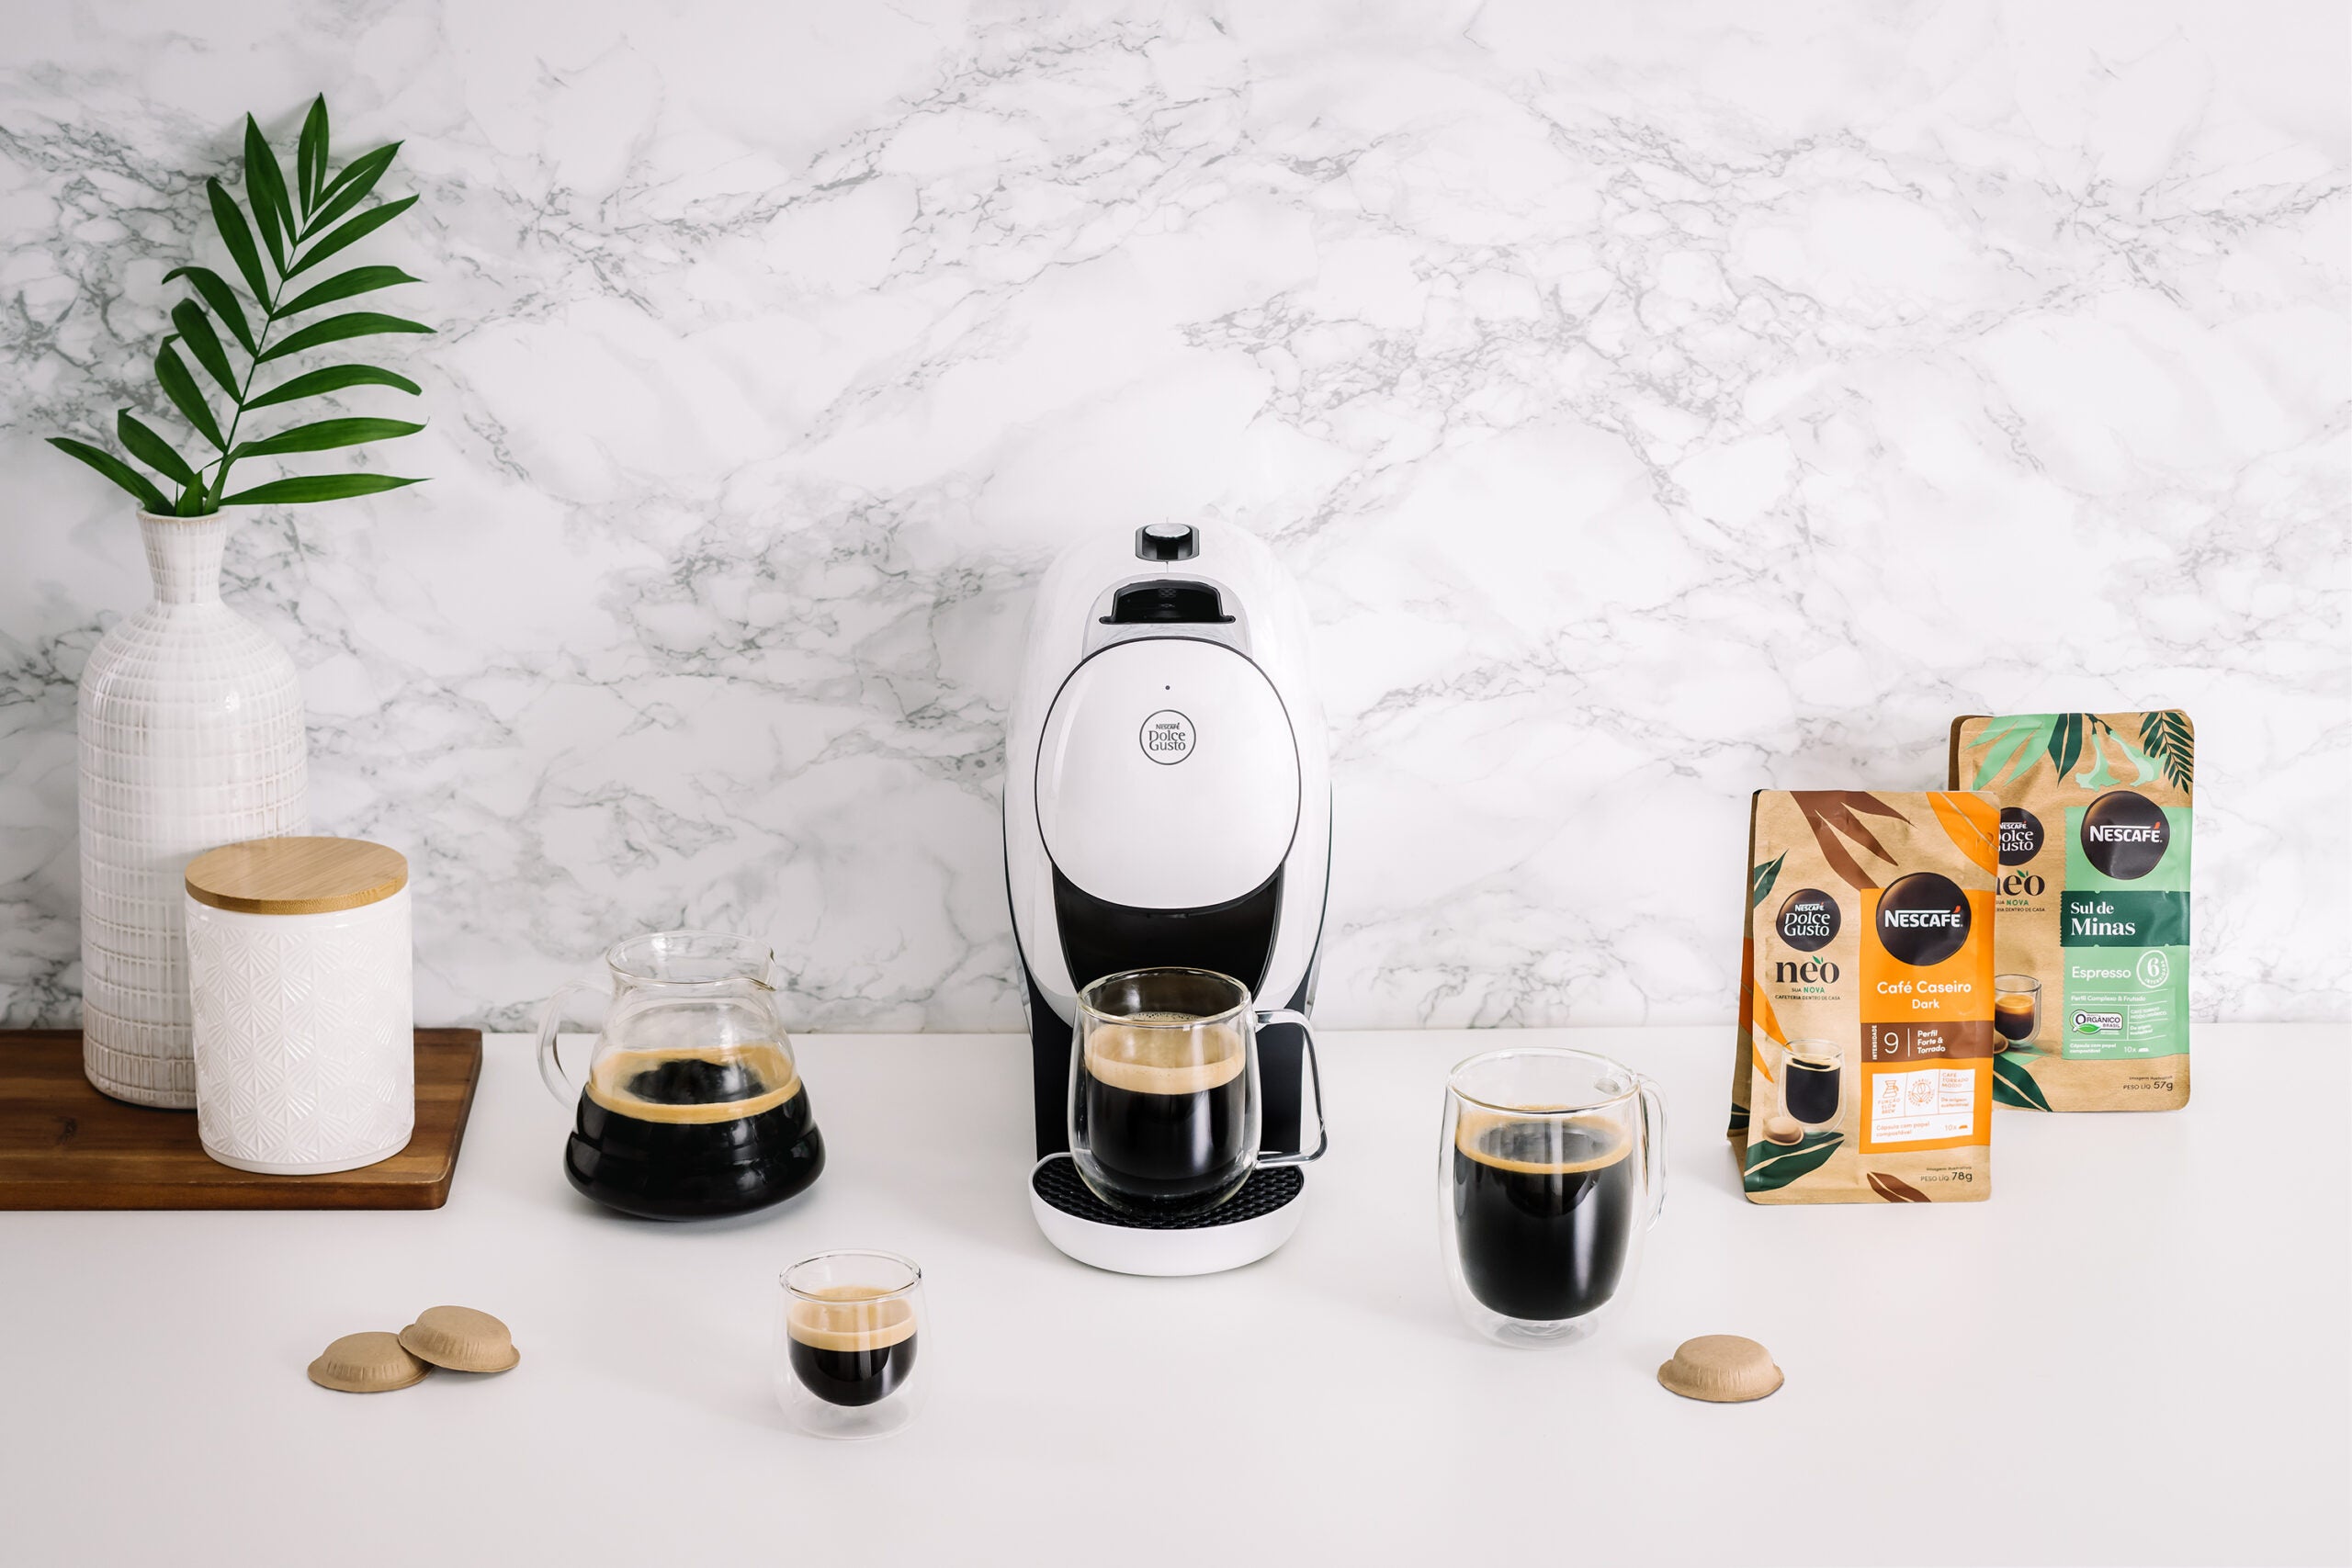 Nescafé Dolce Gusto Coffee Capsule Plant - Food Processing Technology